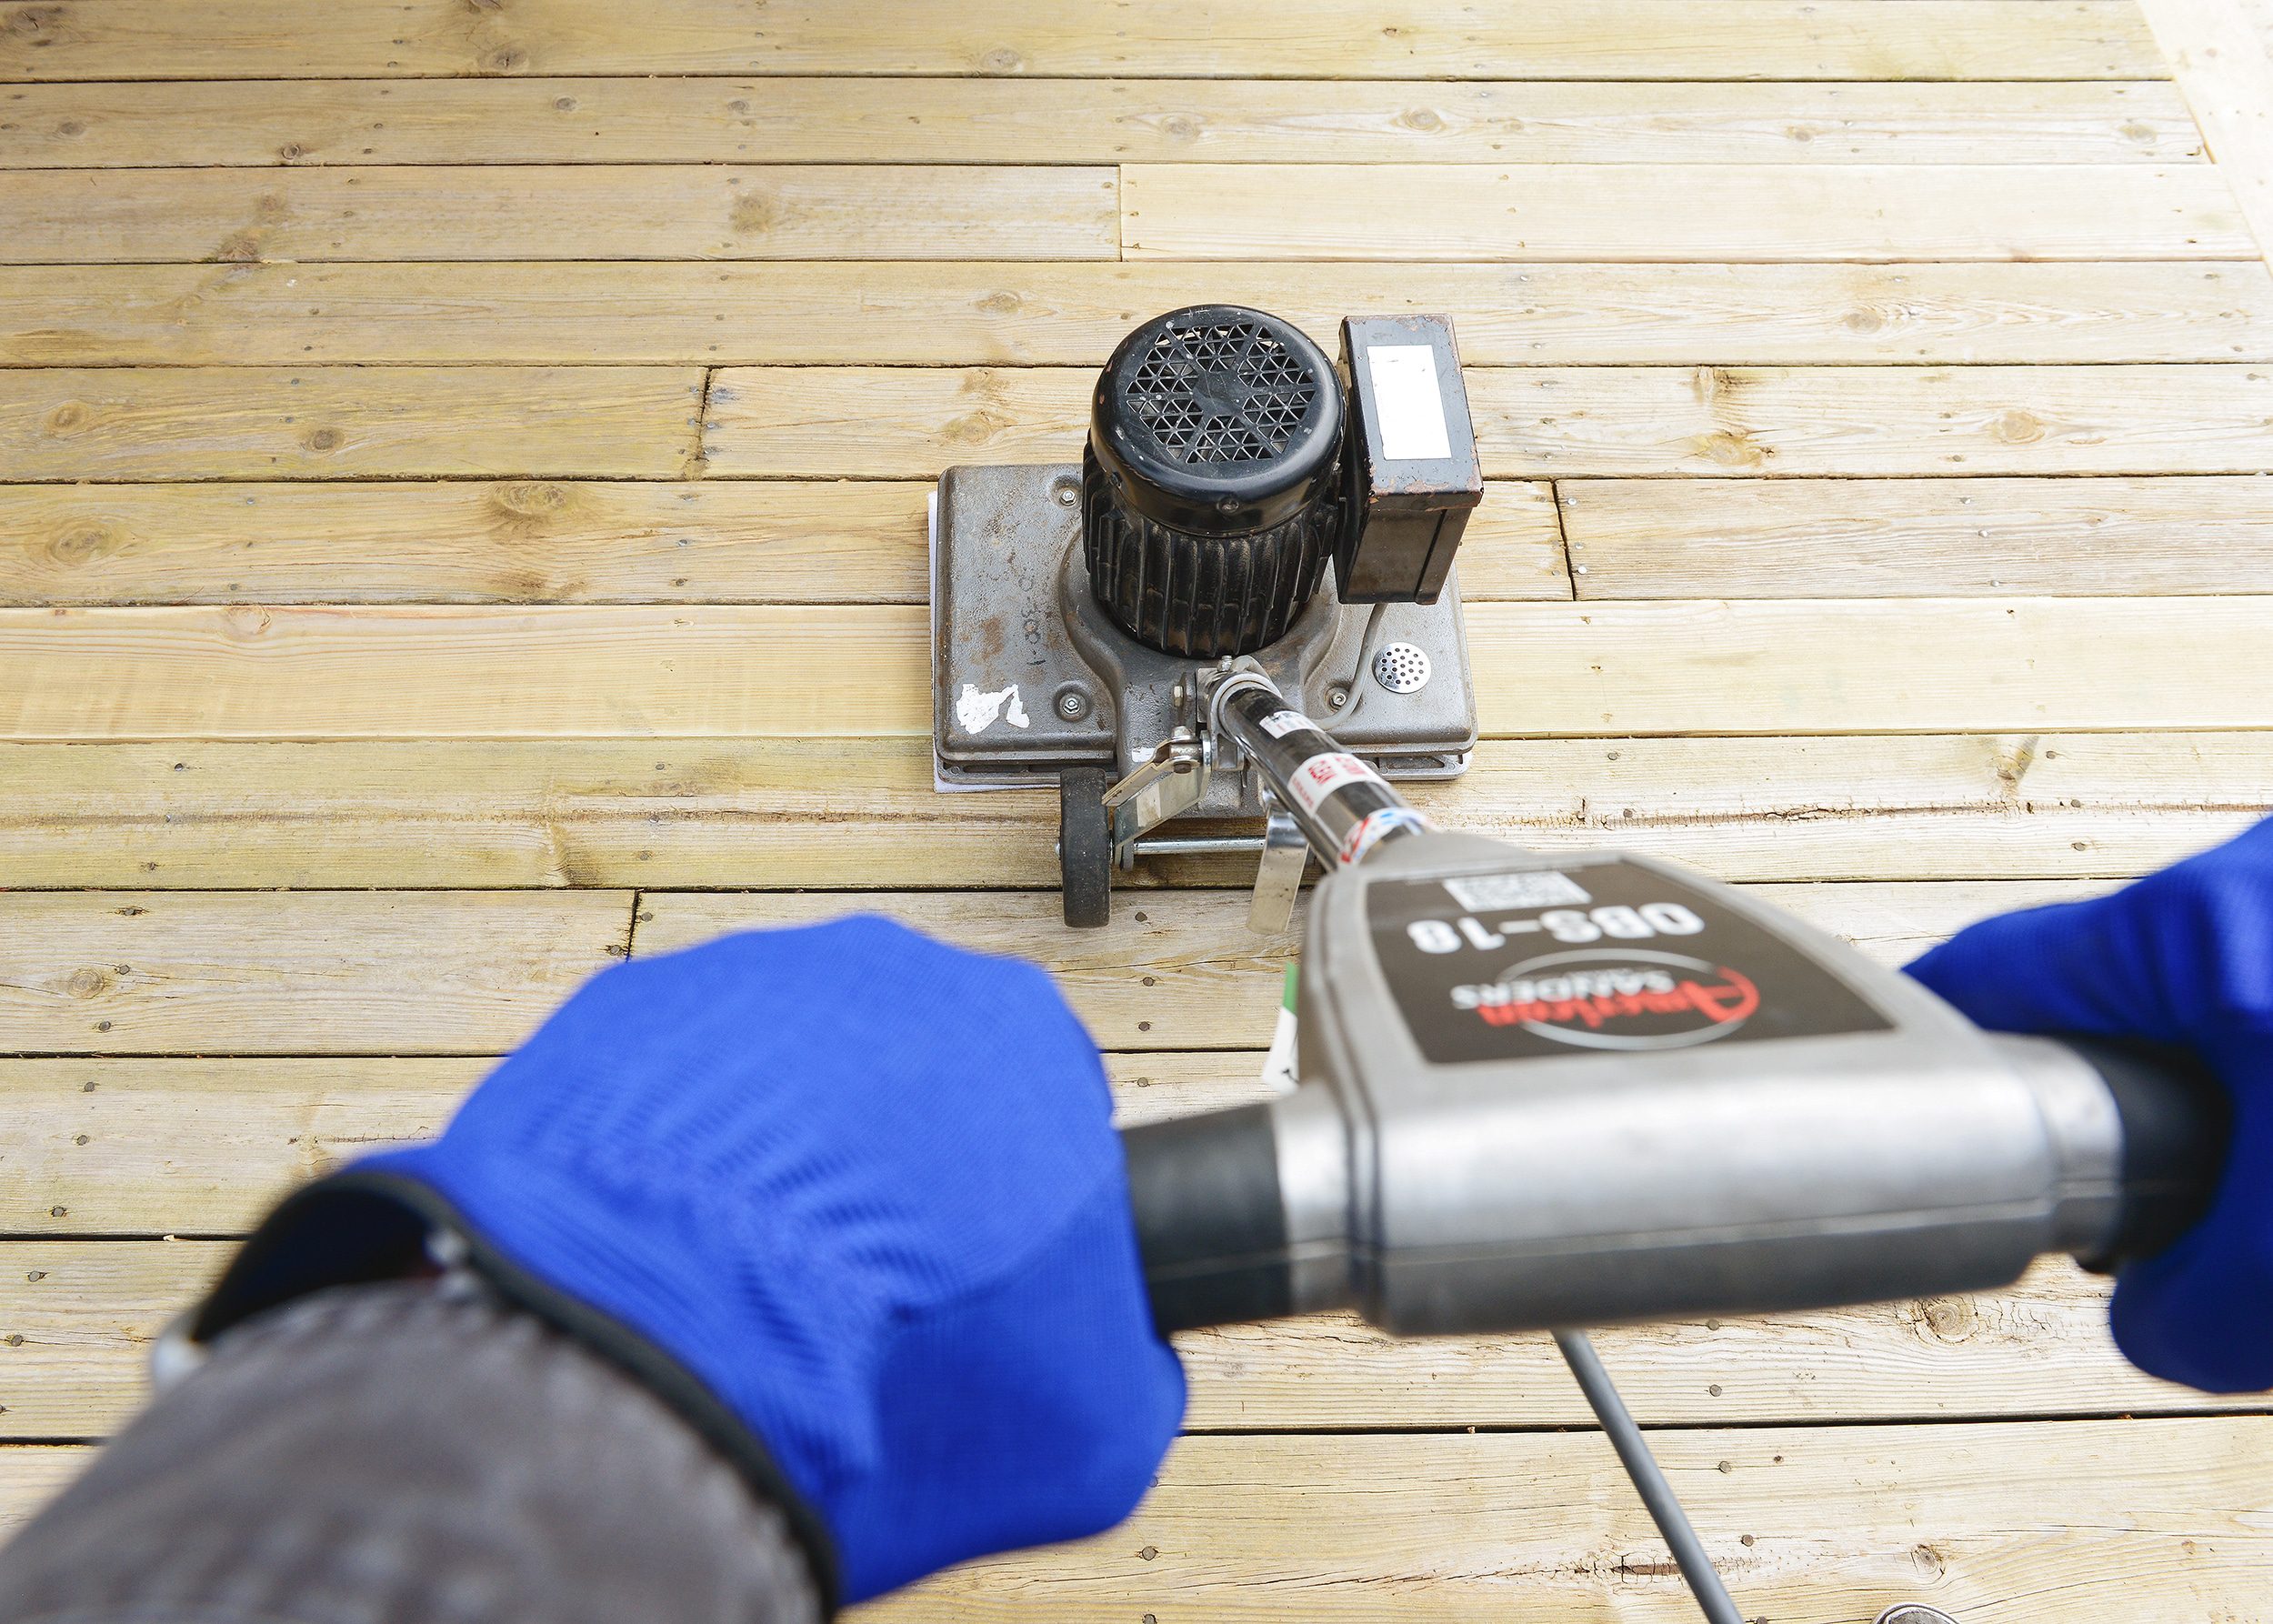 Hands adorned in blue work gloves control an industrial floor sander being used on a deck surface // via Yellow Brick Home